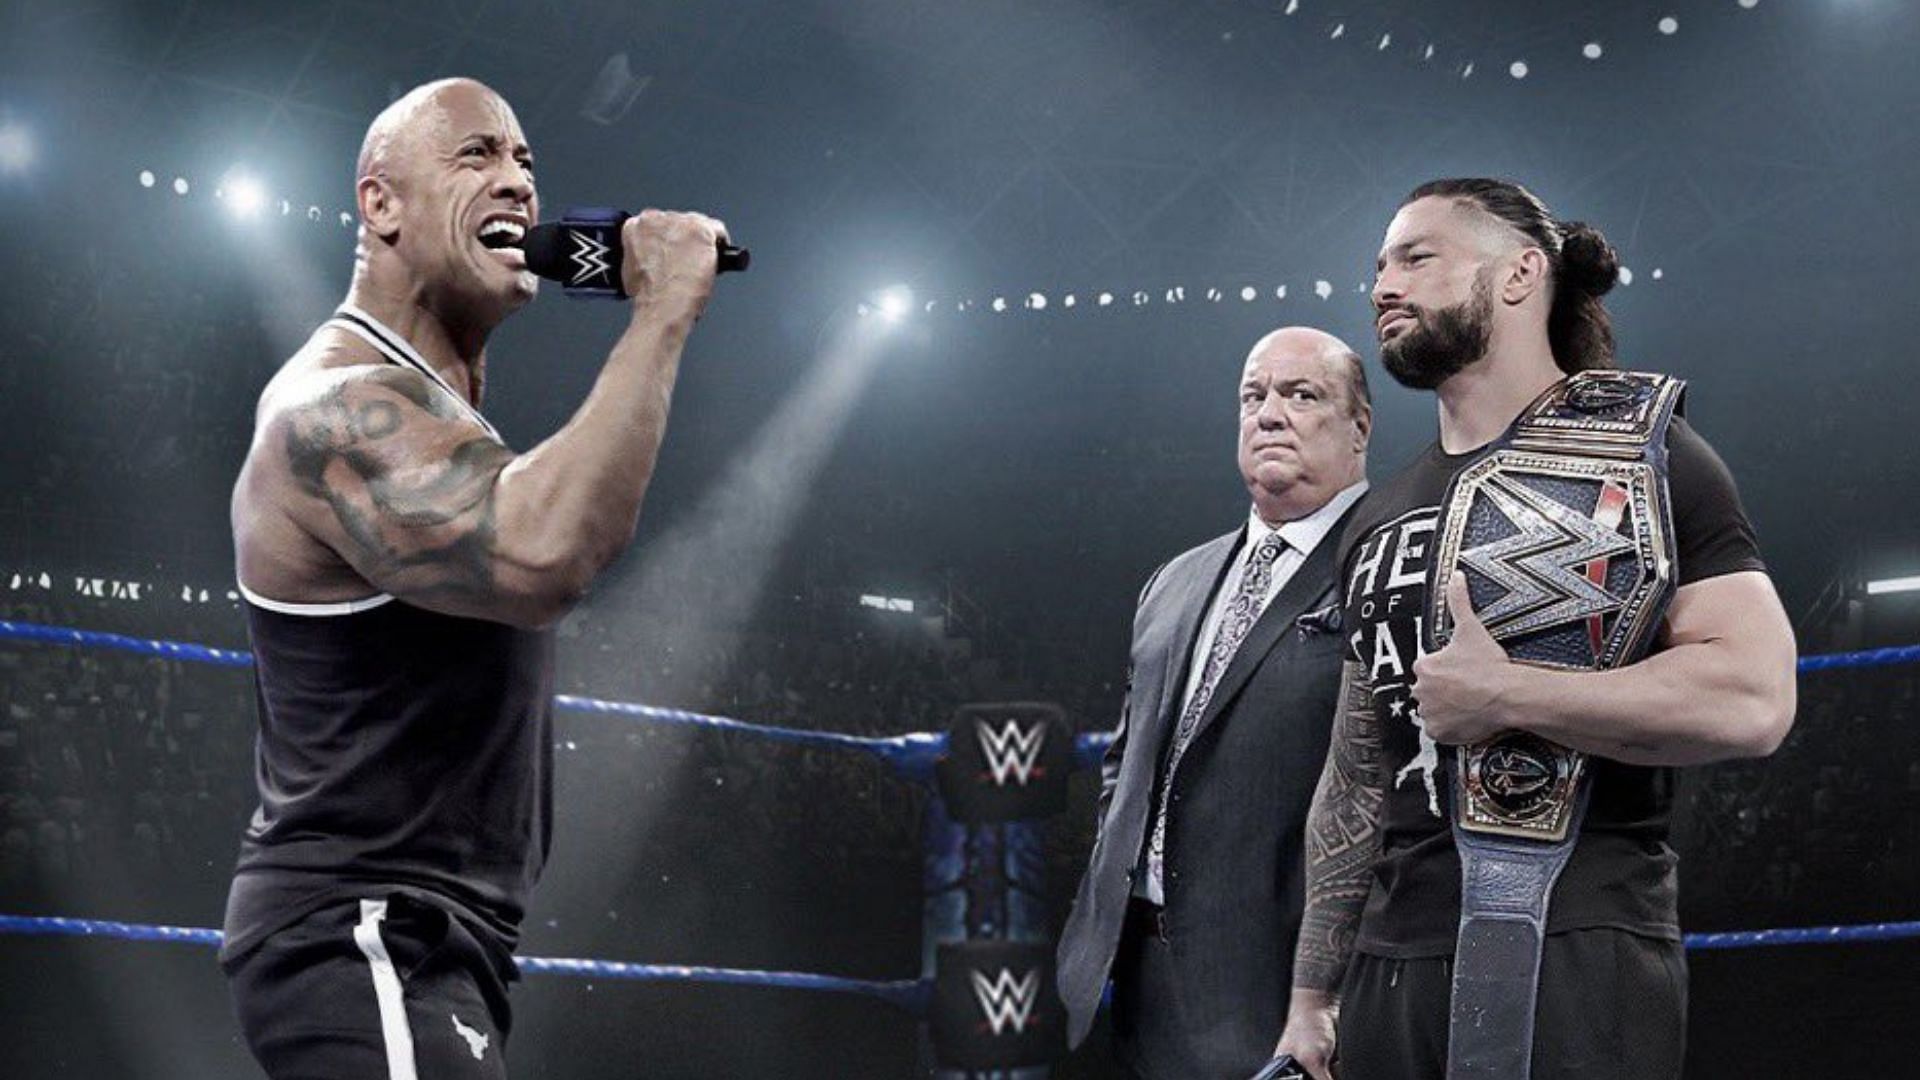 The Rock, Paul Heyman, and Roman Reigns! [Left to Right]